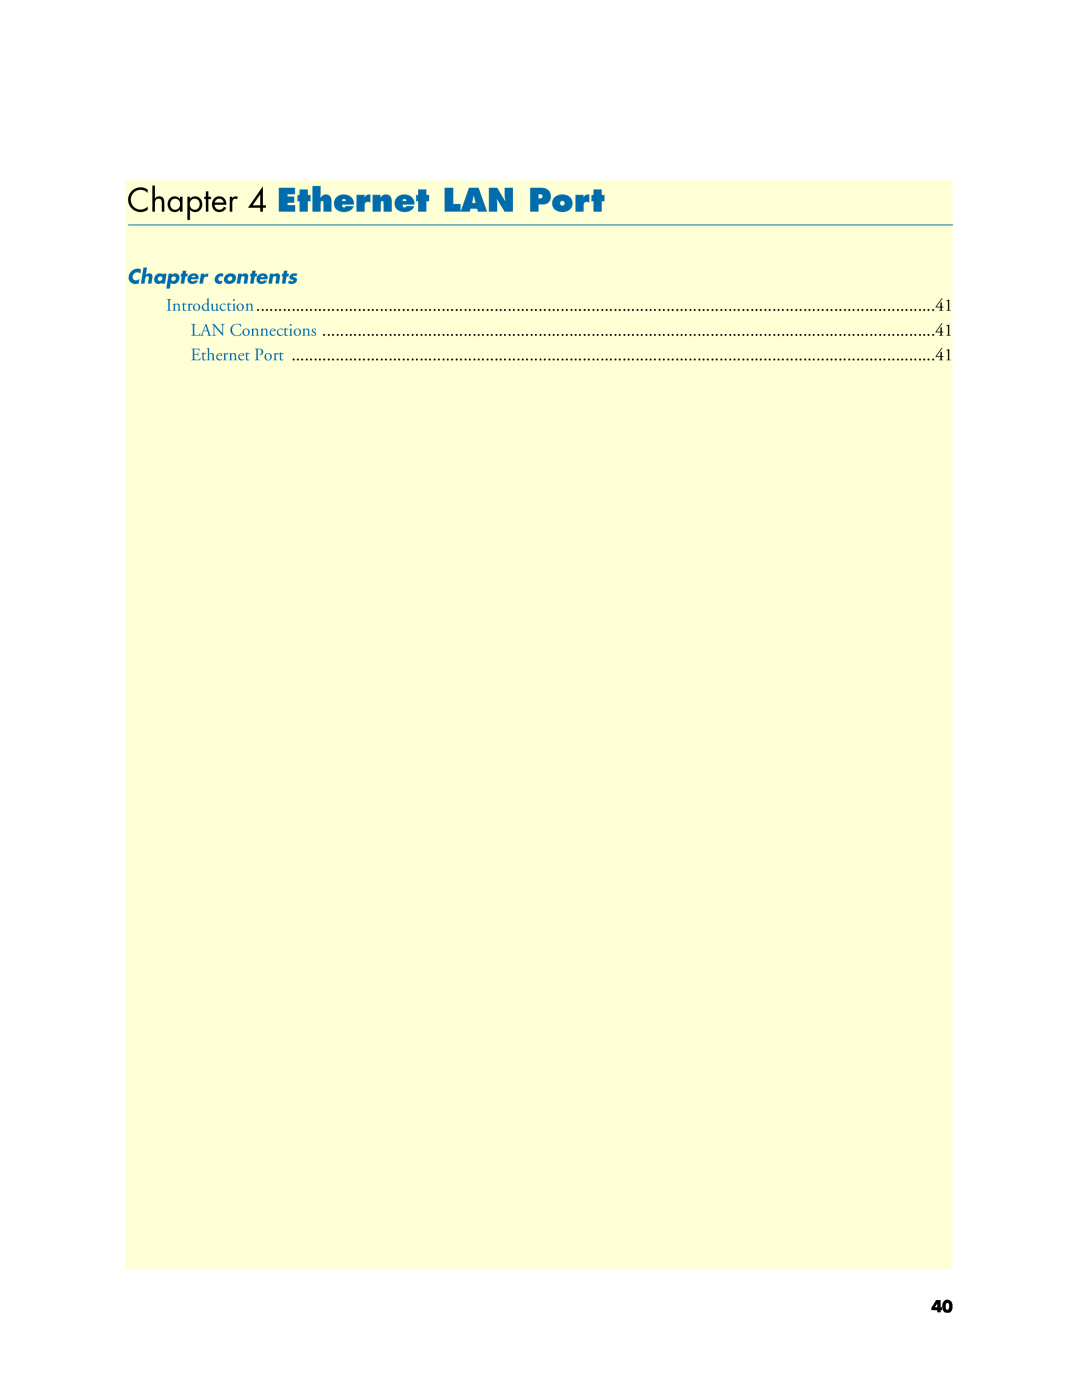 Patton electronic 2621, 2635 manual Ethernet LAN Port, Chapter contents 